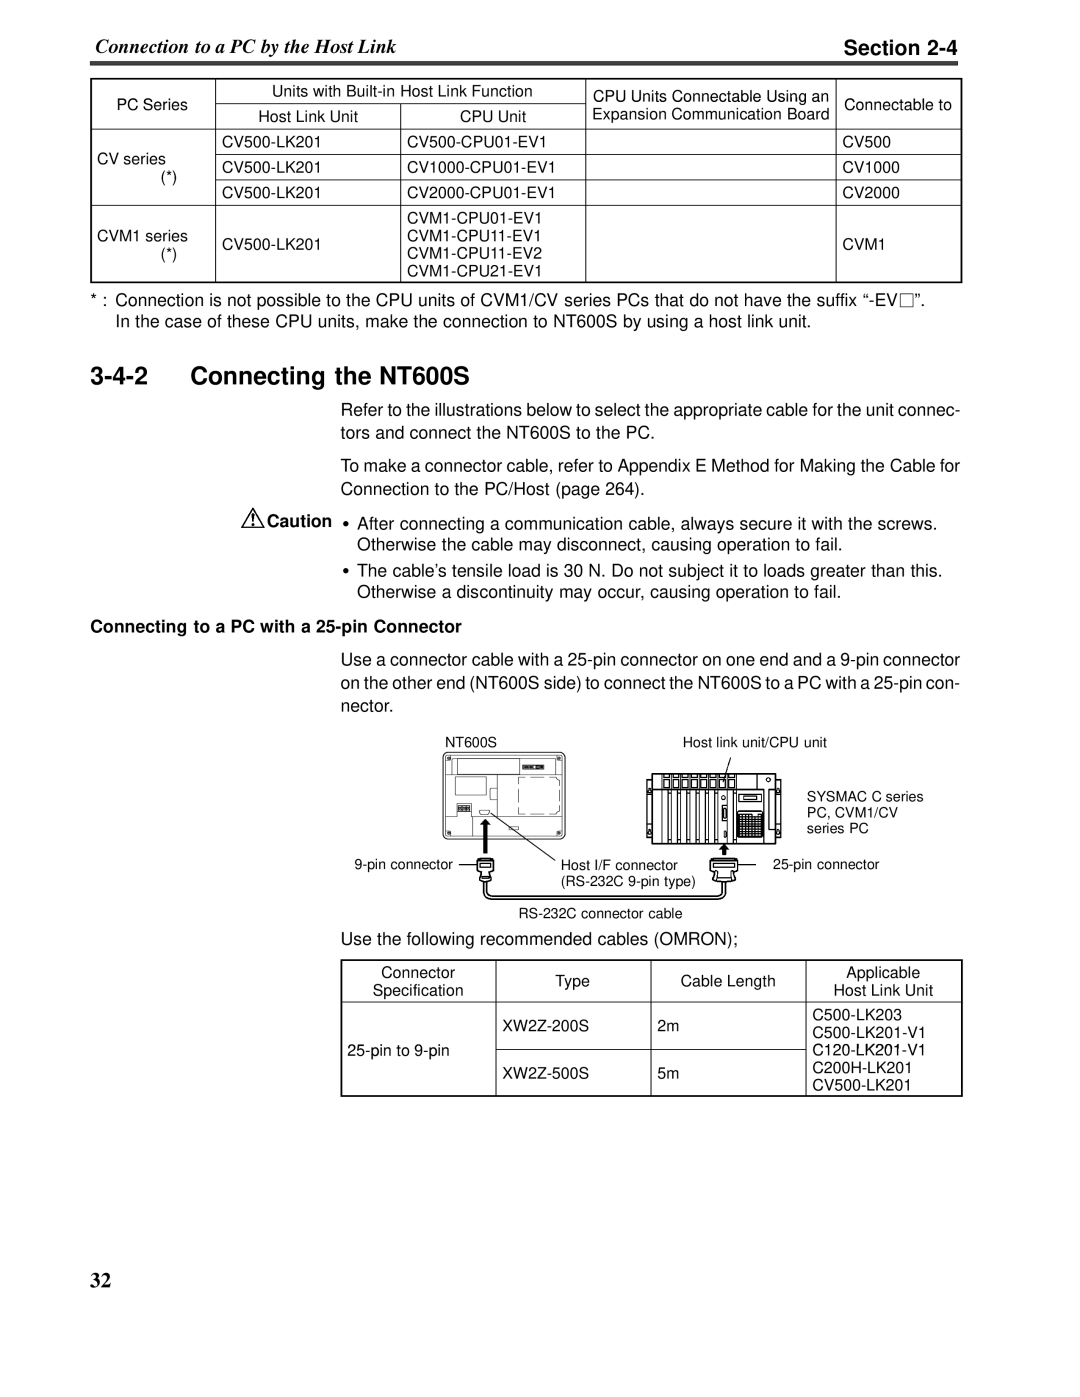 Omron V022-E3-1 operation manual 3-4-2Connecting the NT600S, Section, Connecting to a PC with a 25-pinConnector 